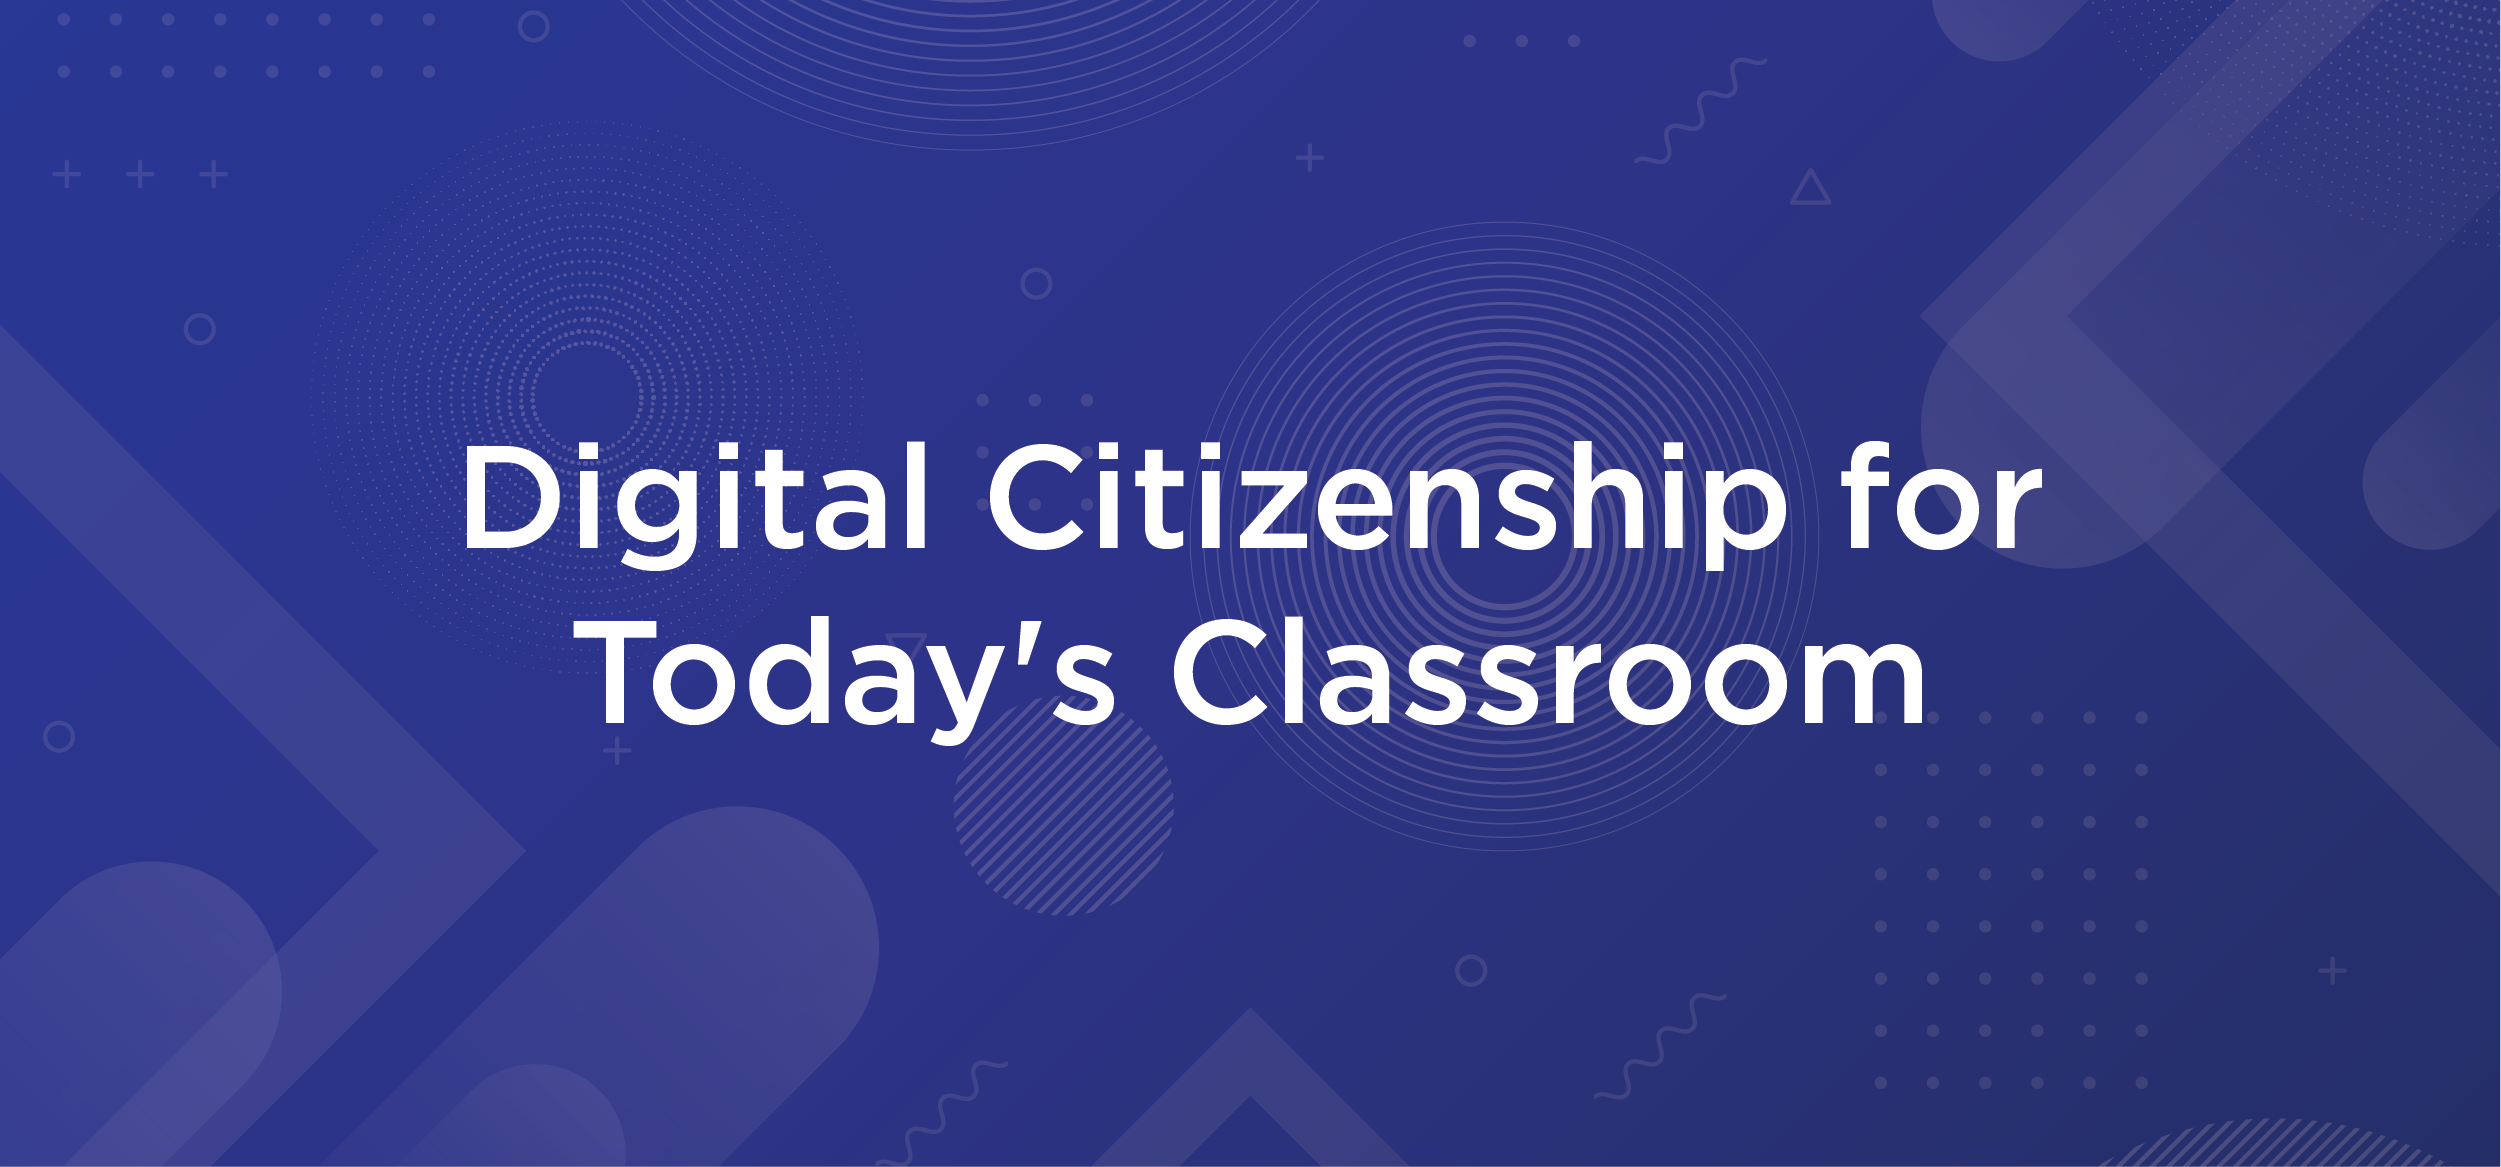 Digital Citizenship for Today’s Classroom